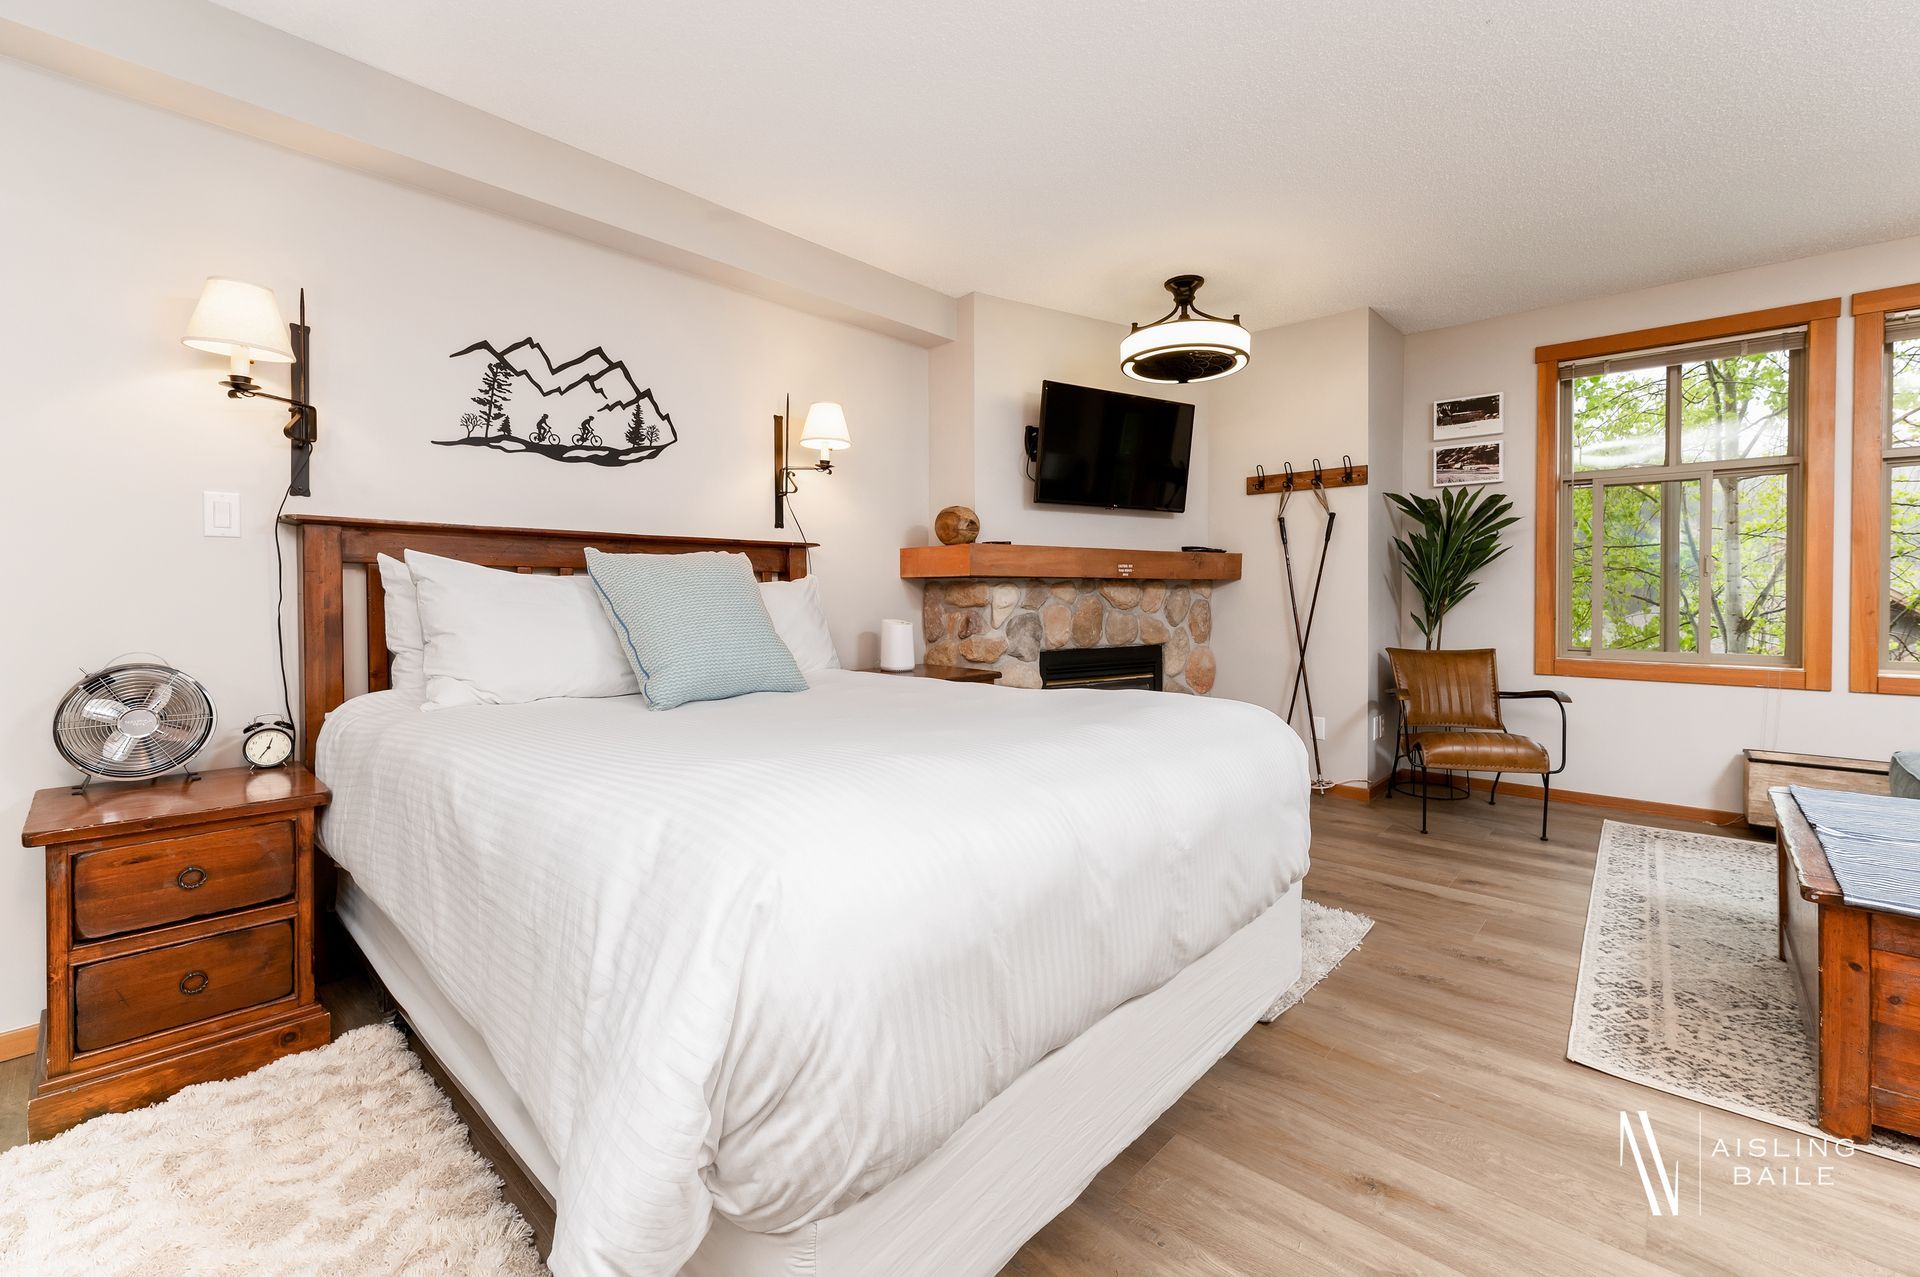 Studio bedroom of the Upper Tip, a Panorama BC Vacation Rental hosted by Aisling Baile Property Management.